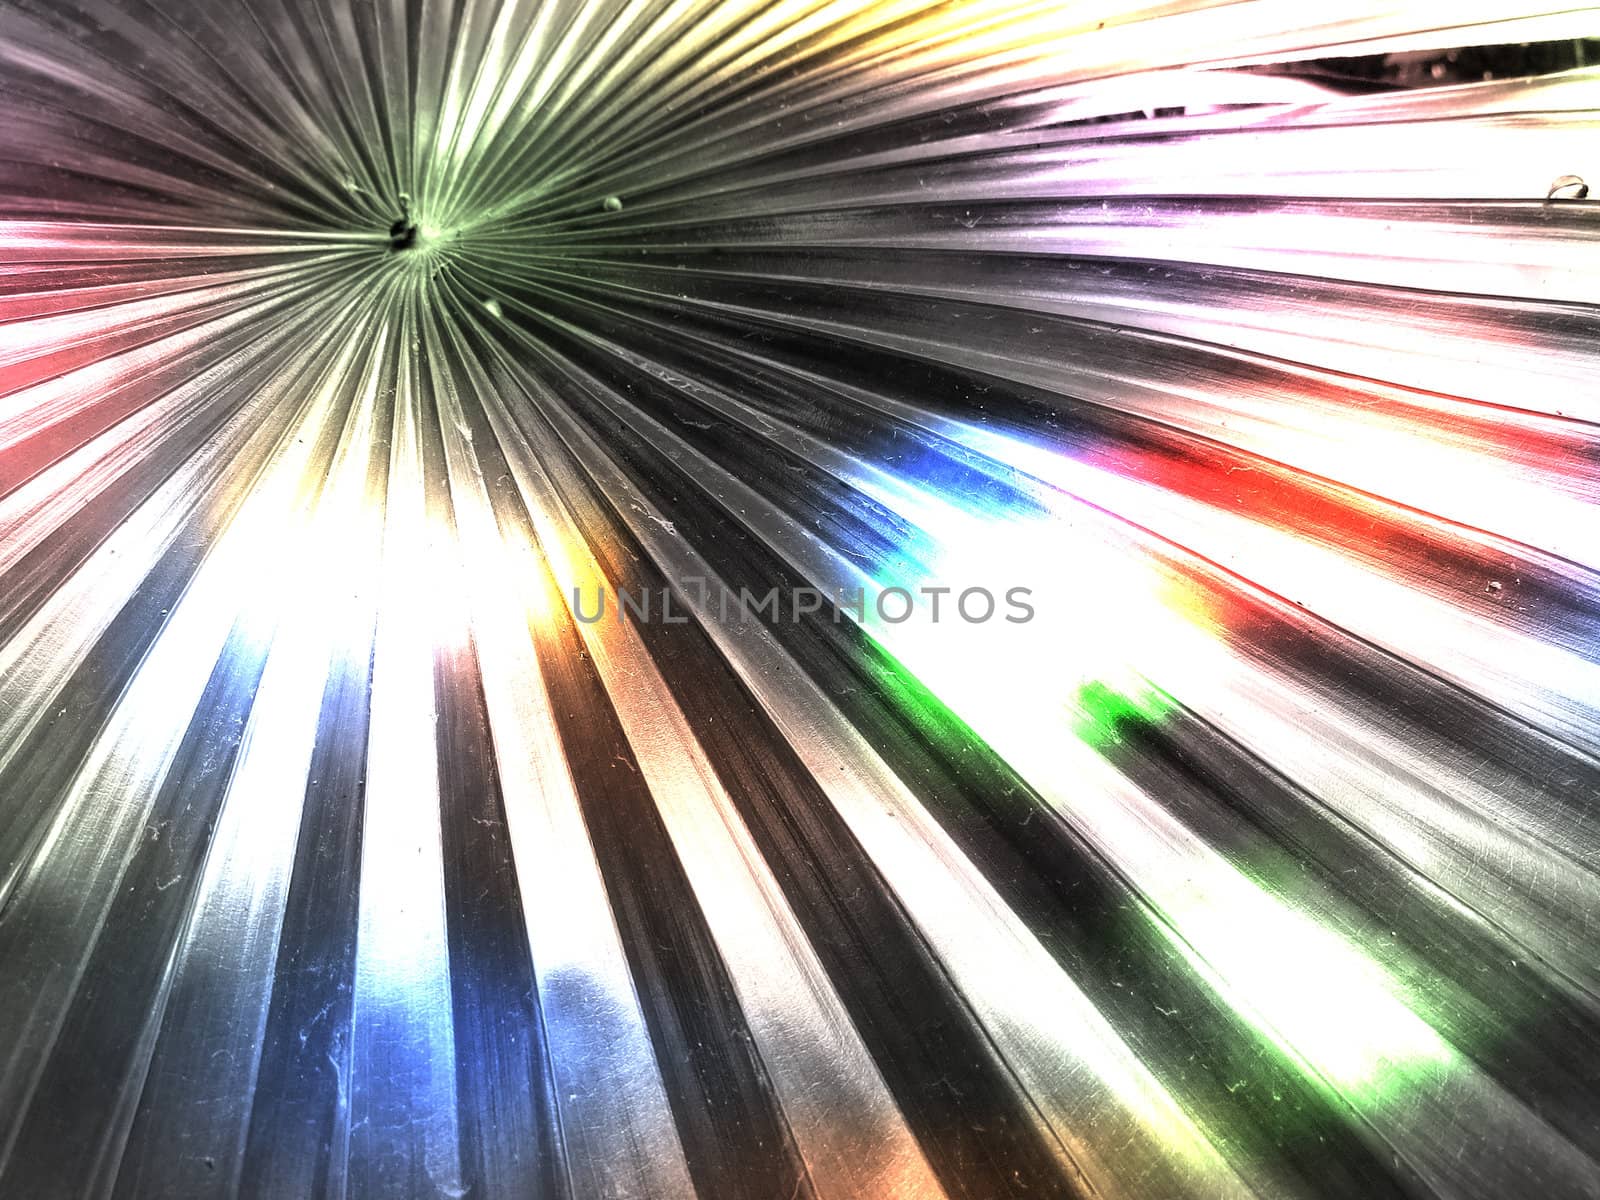 An abstract background of a metallic striped shape with reflections of colorful lights.                               